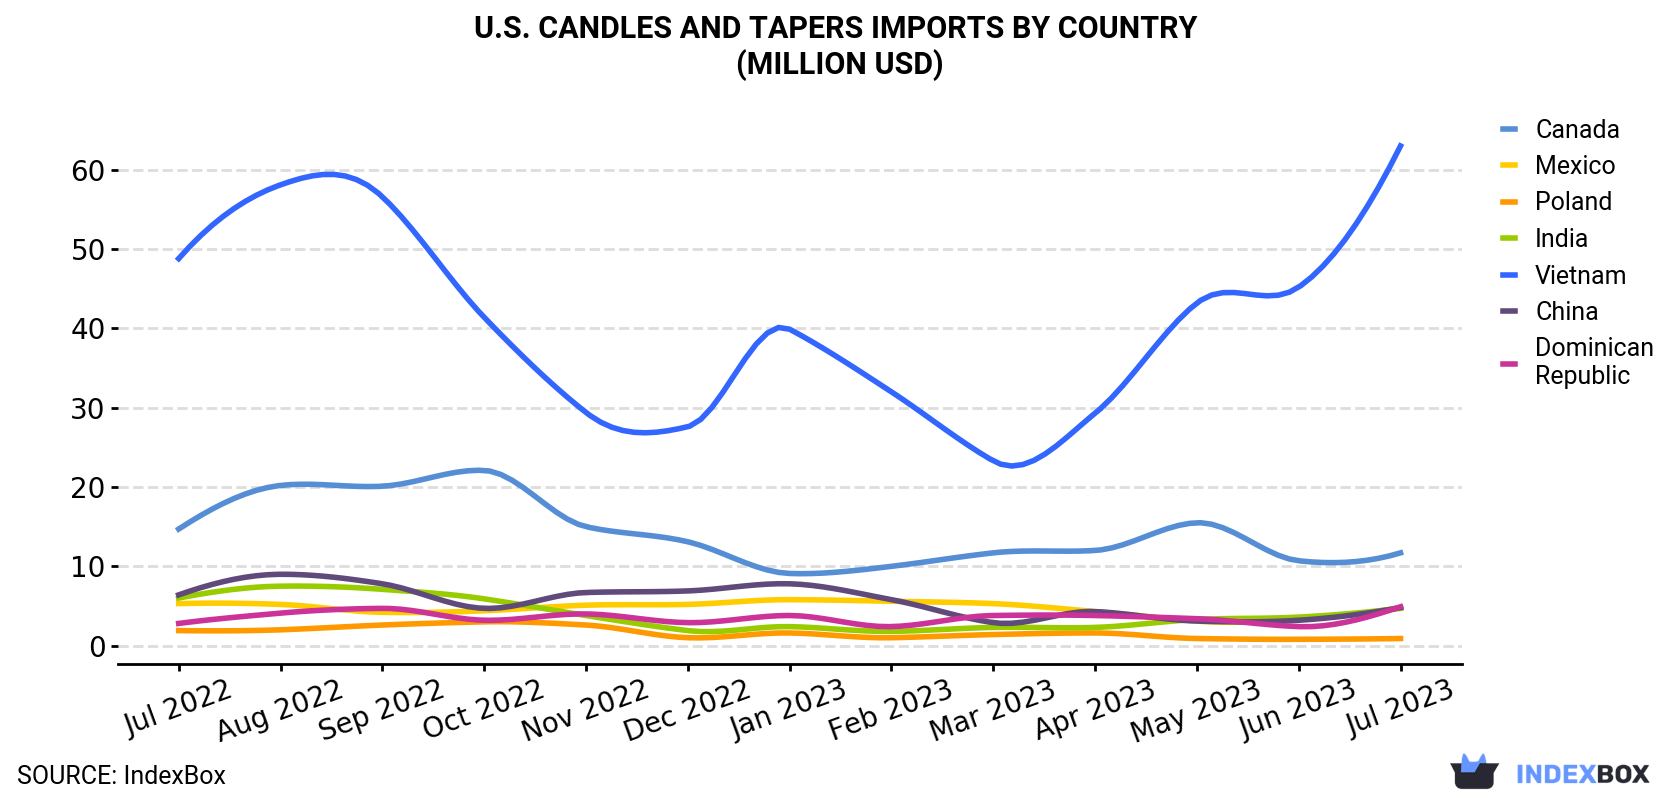 U.S. Candles And Tapers Imports By Country (Million USD)